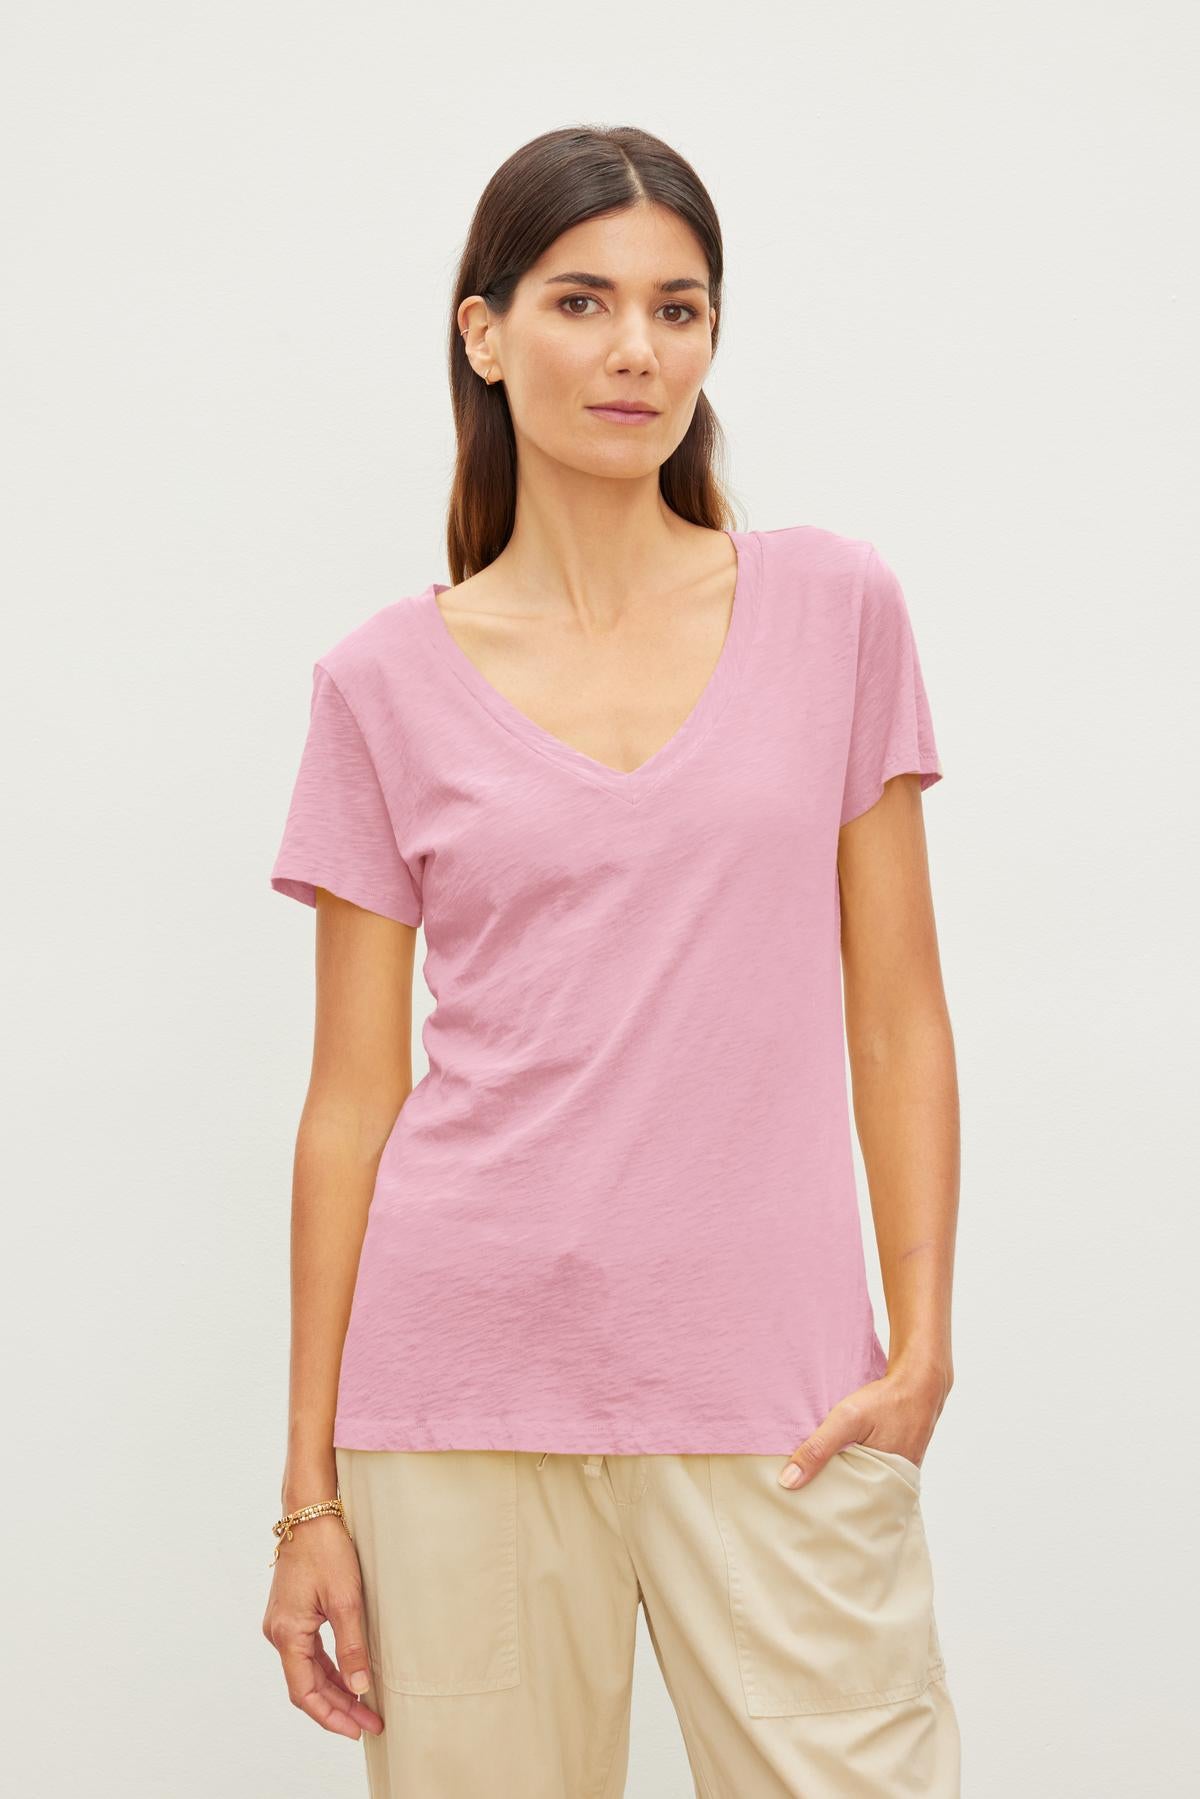 A woman with long dark hair stands against a plain background wearing a pink LILITH TEE by Velvet by Graham & Spencer and beige pants.-37241138774209